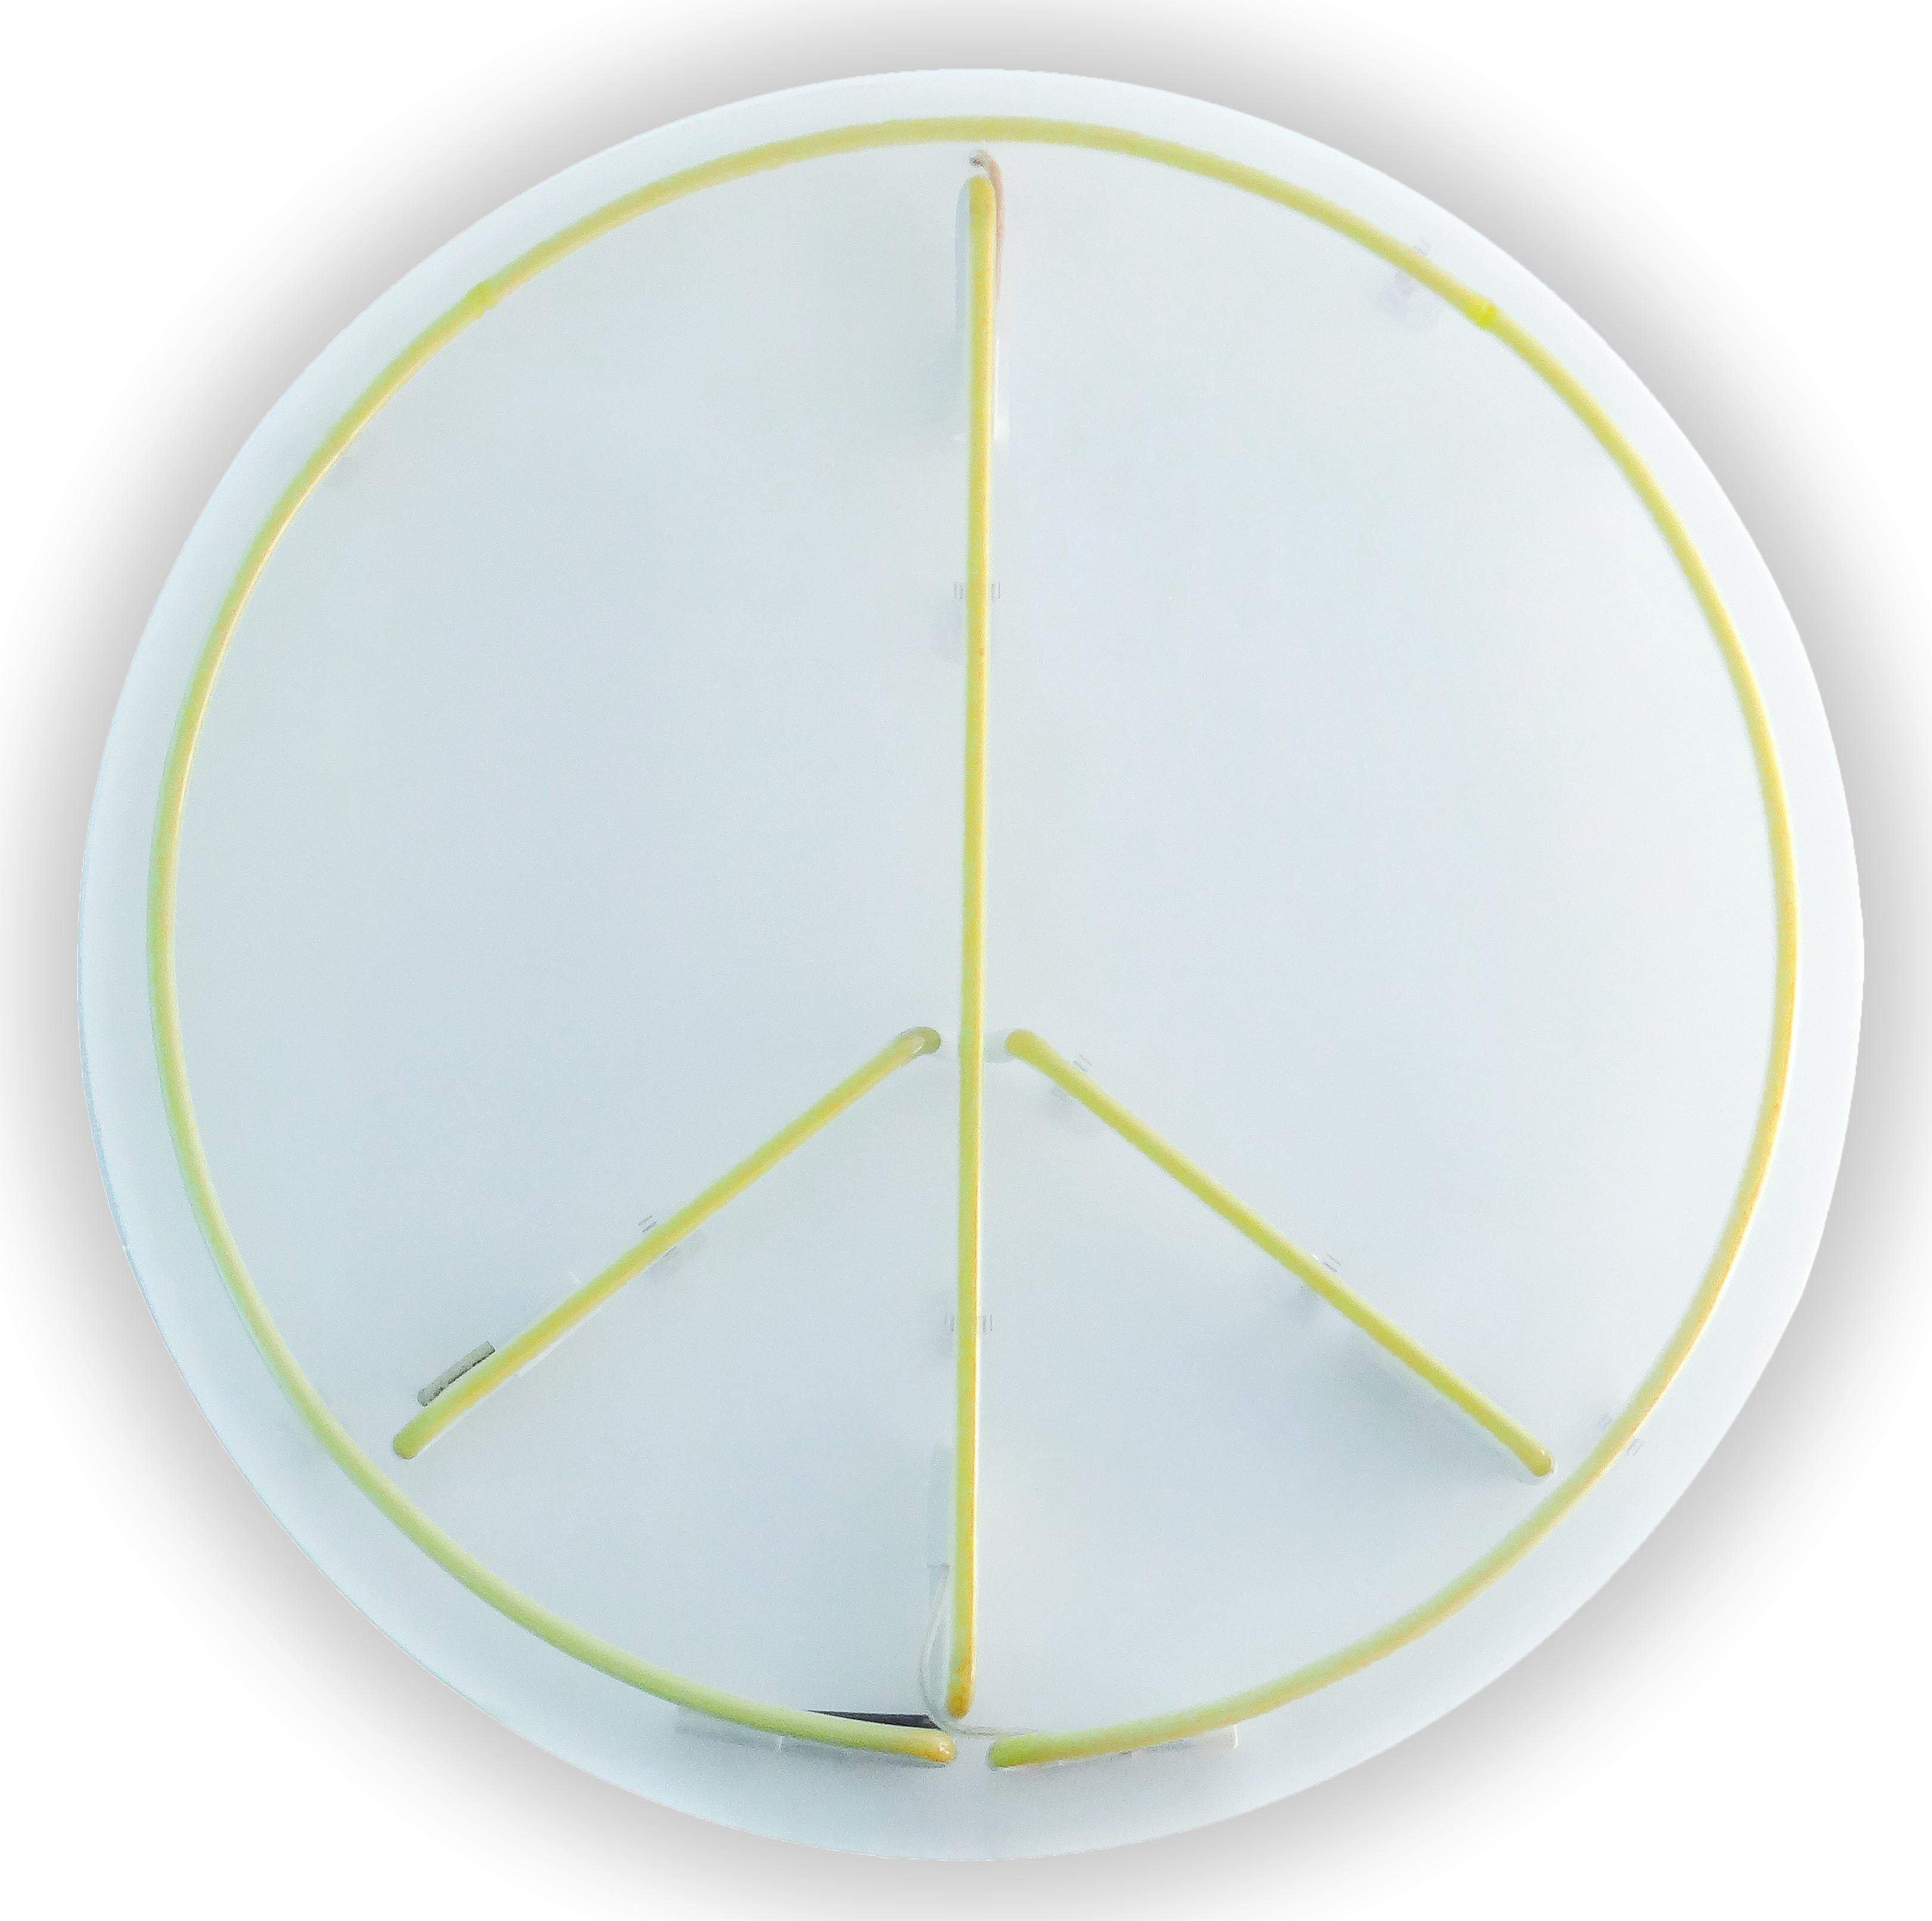 American  PEACE sign. Wall Neon sculpture